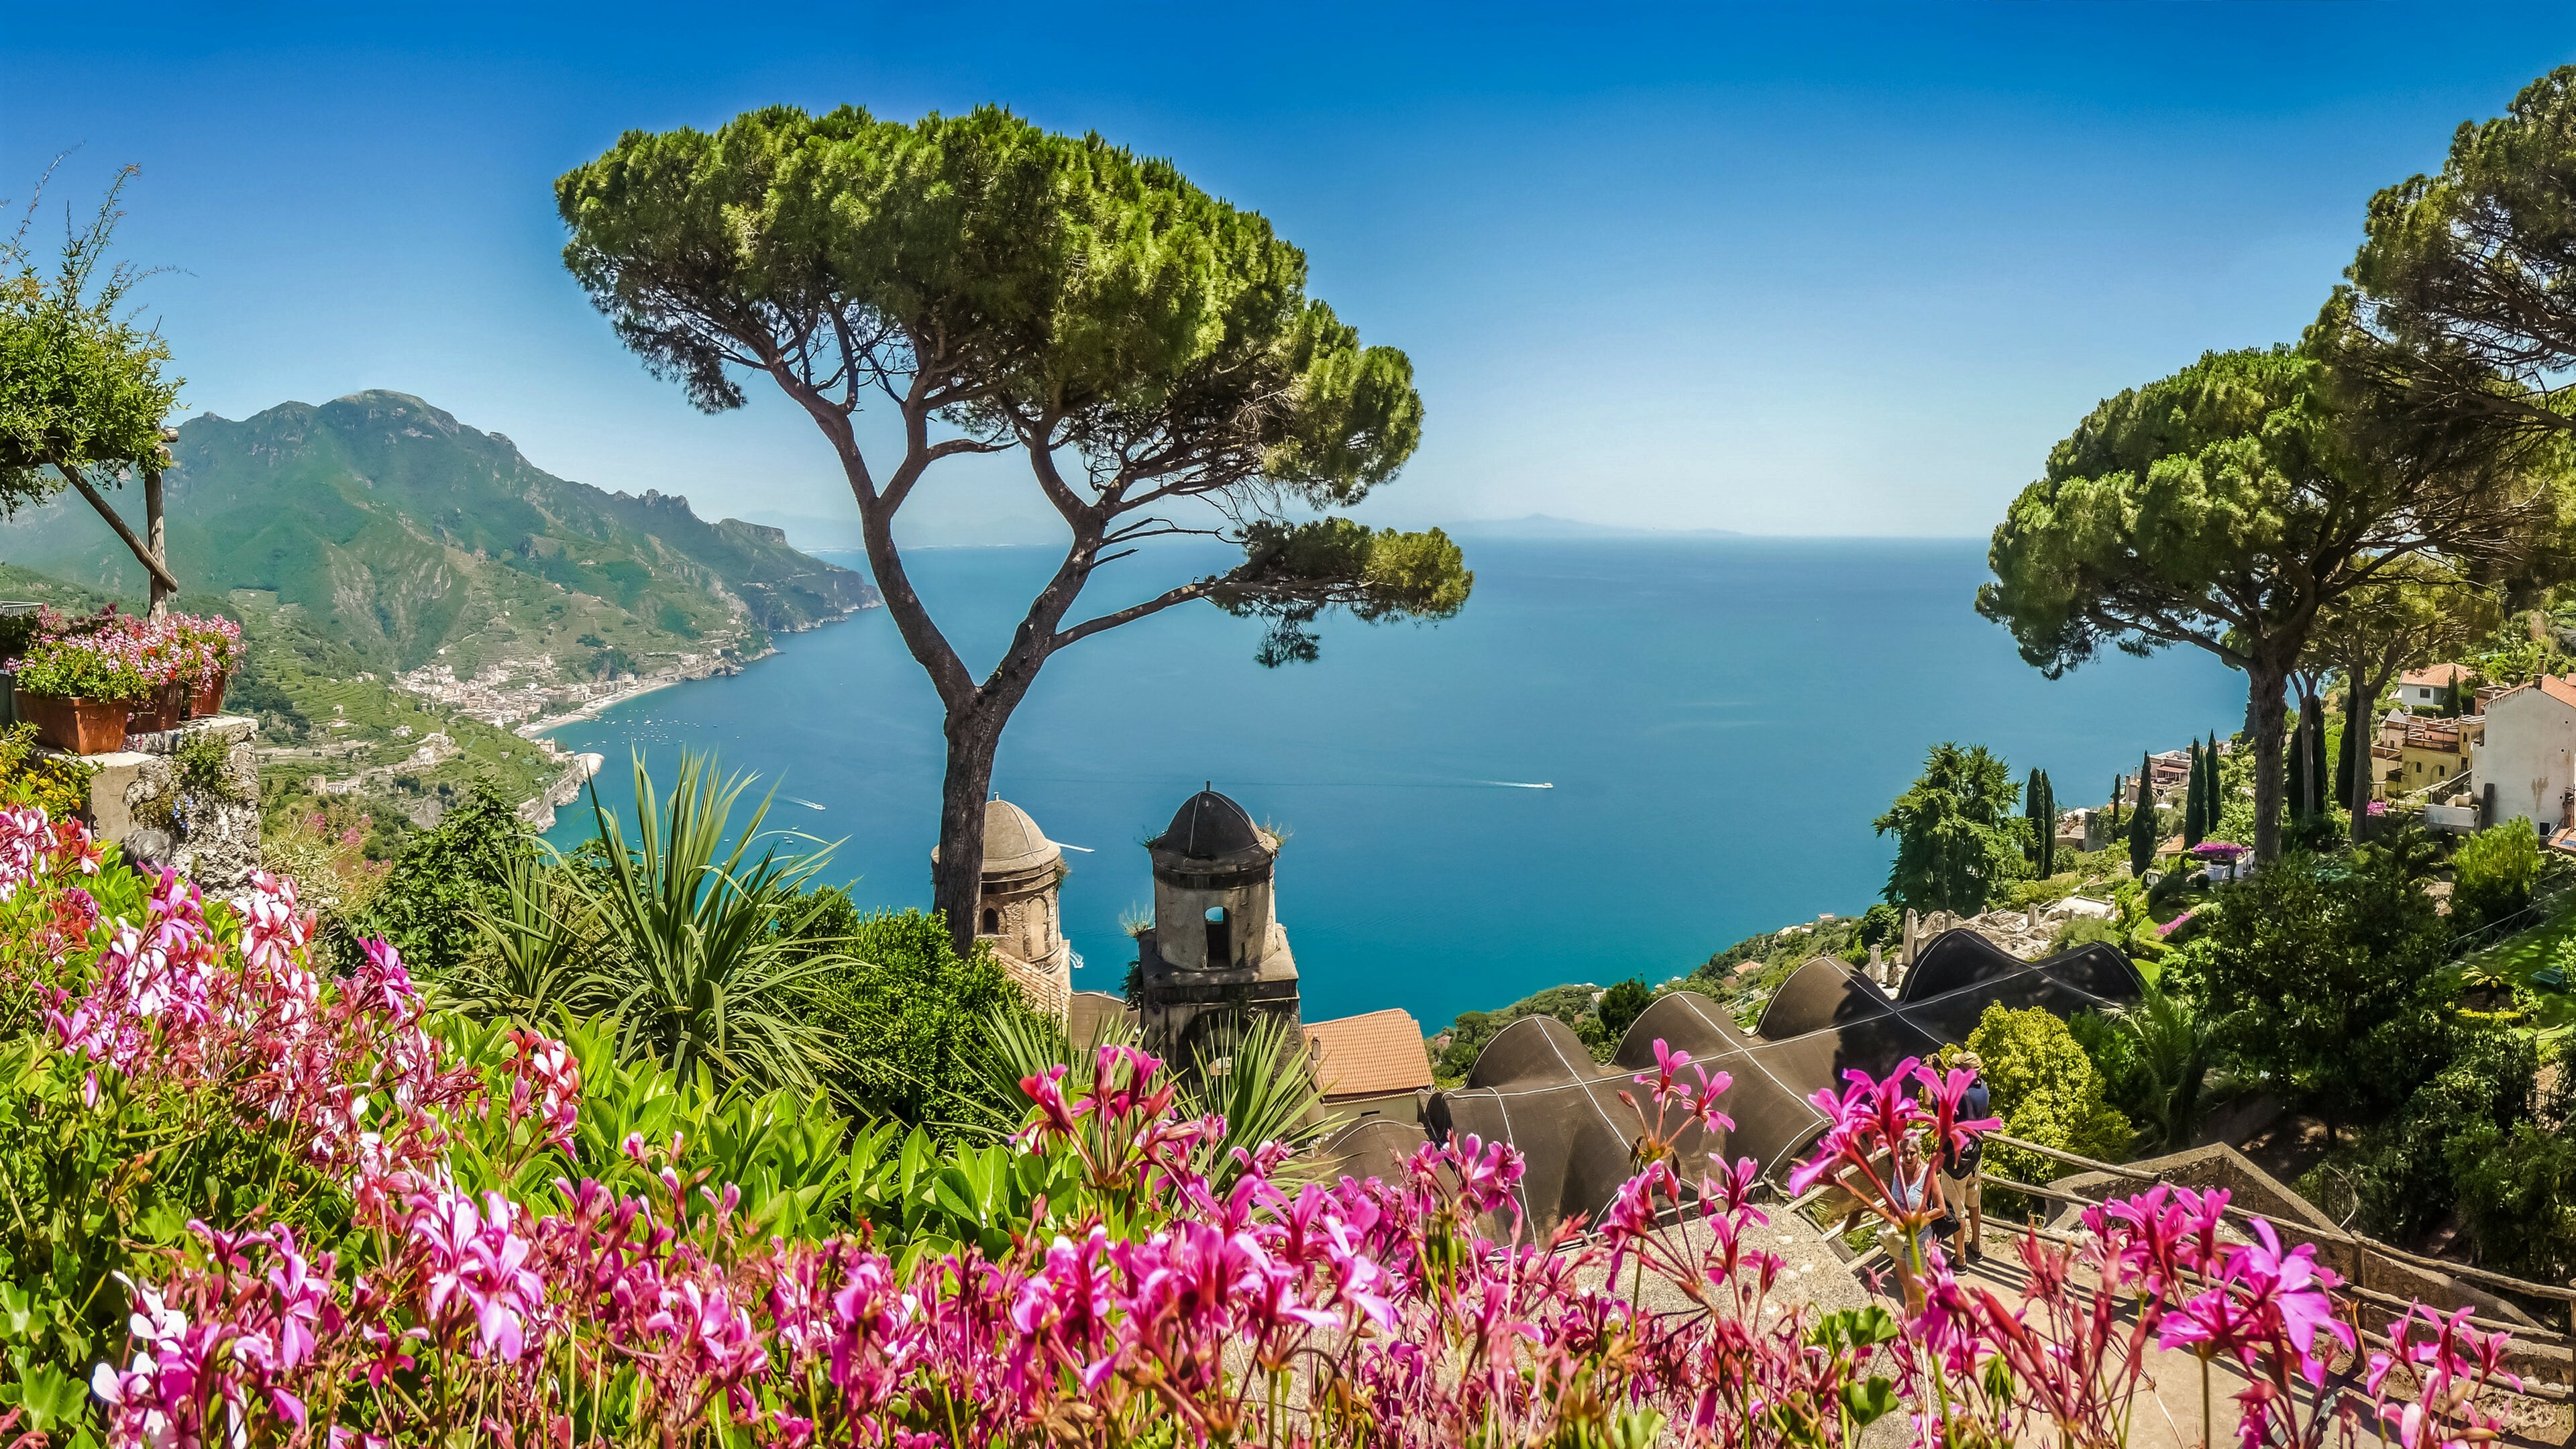 Italy: Amalfi Coast, The third-most populous member state of the European Union. 3840x2160 4K Wallpaper.